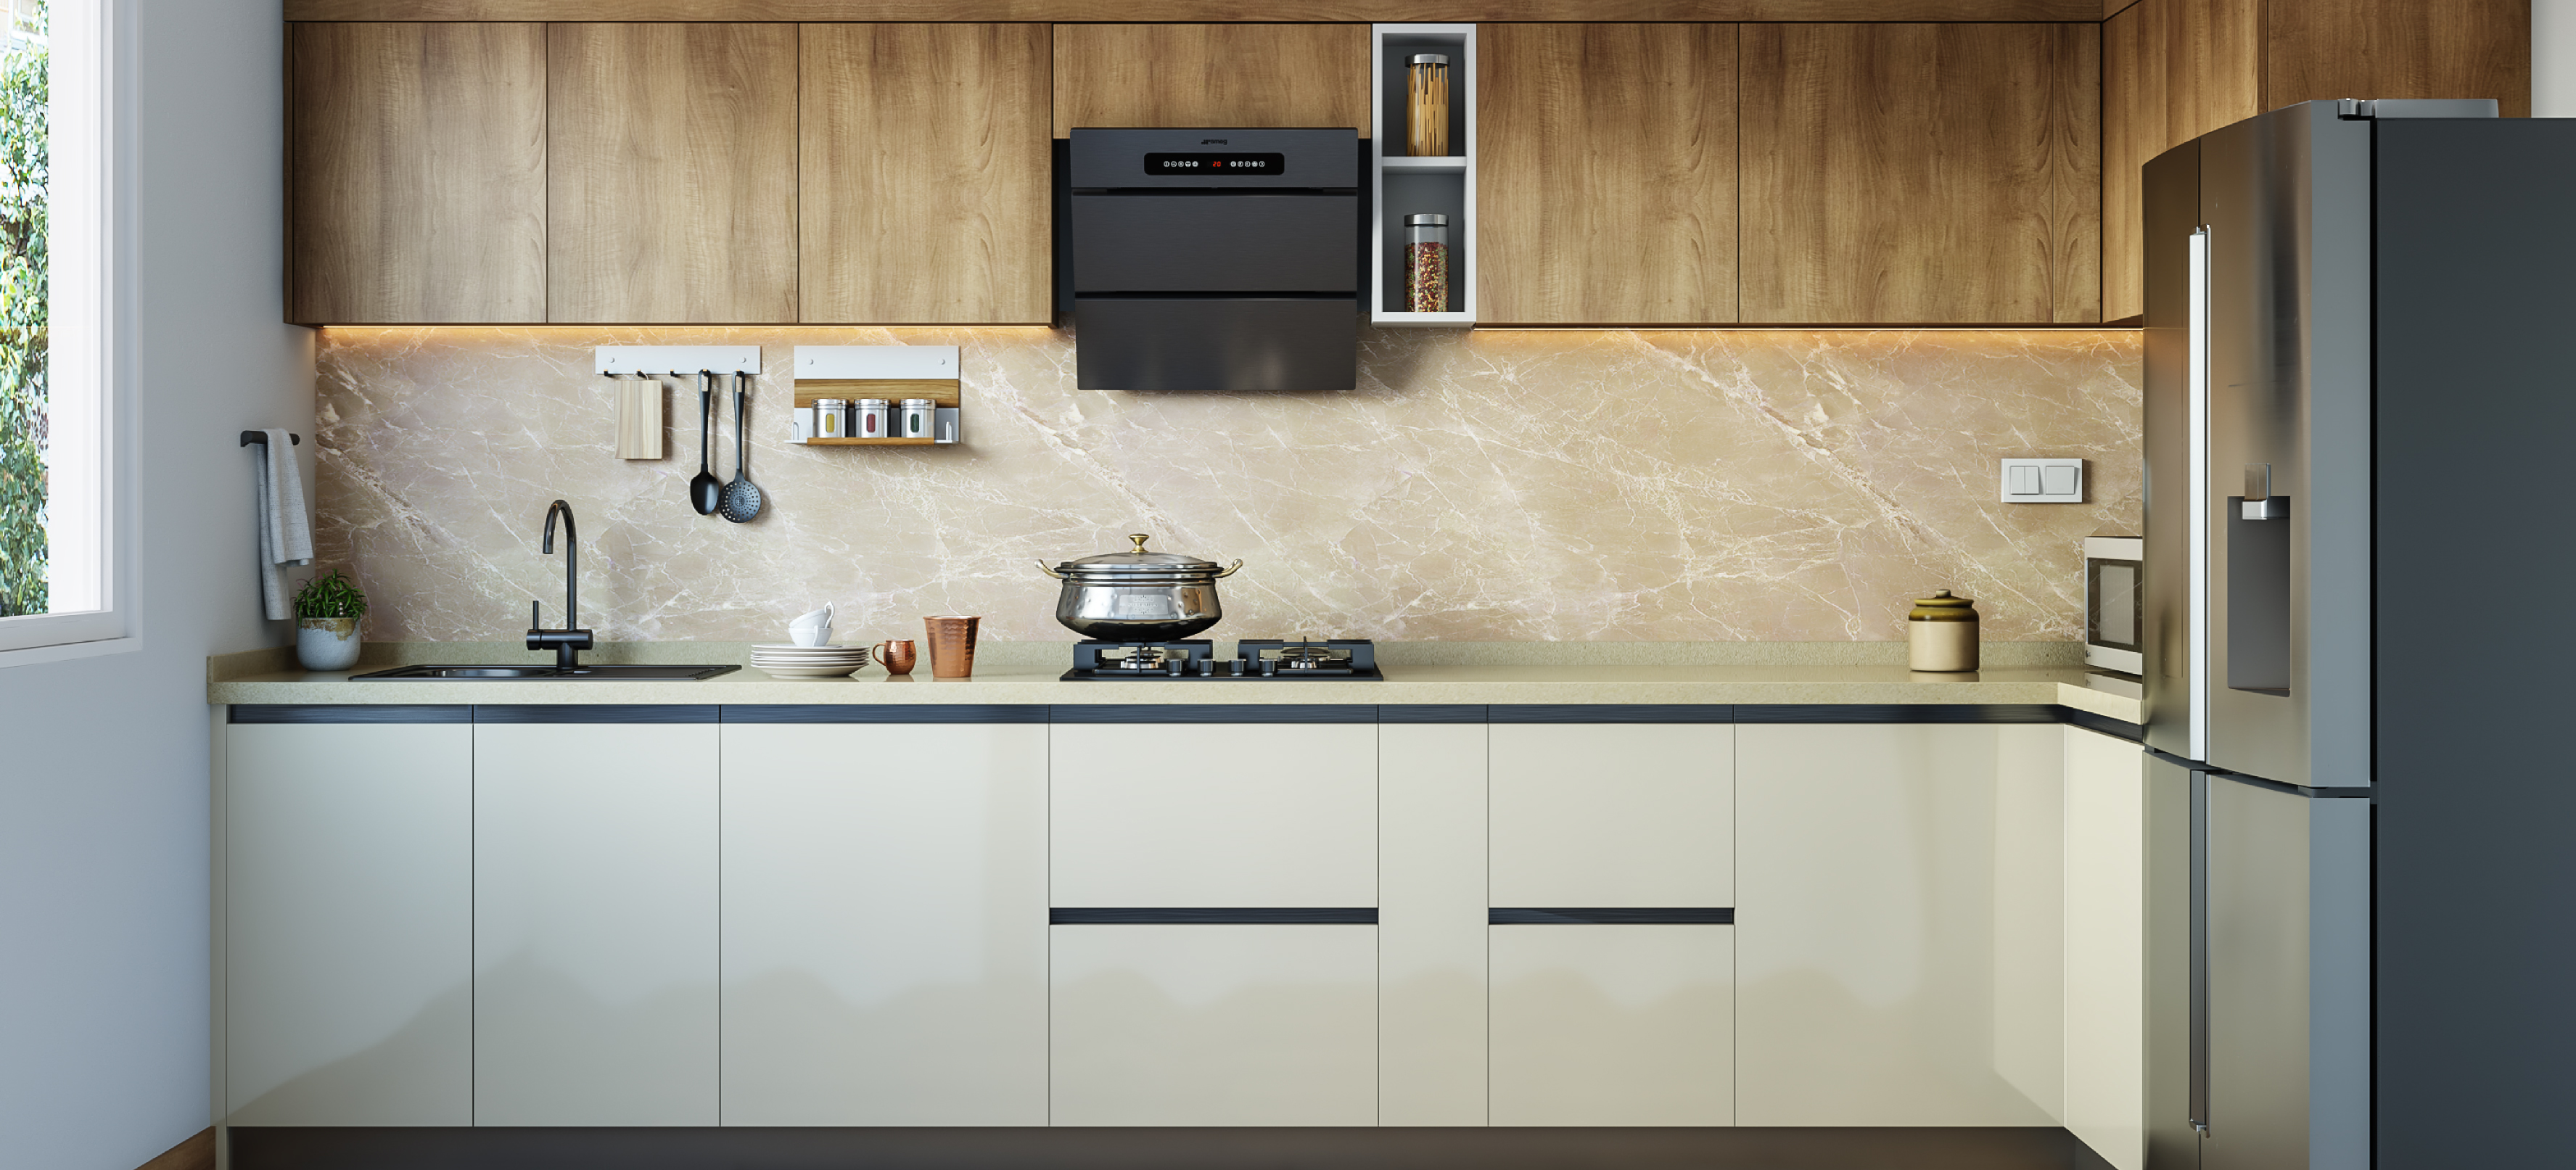 Modular Kitchen Sizes And Dimensions In